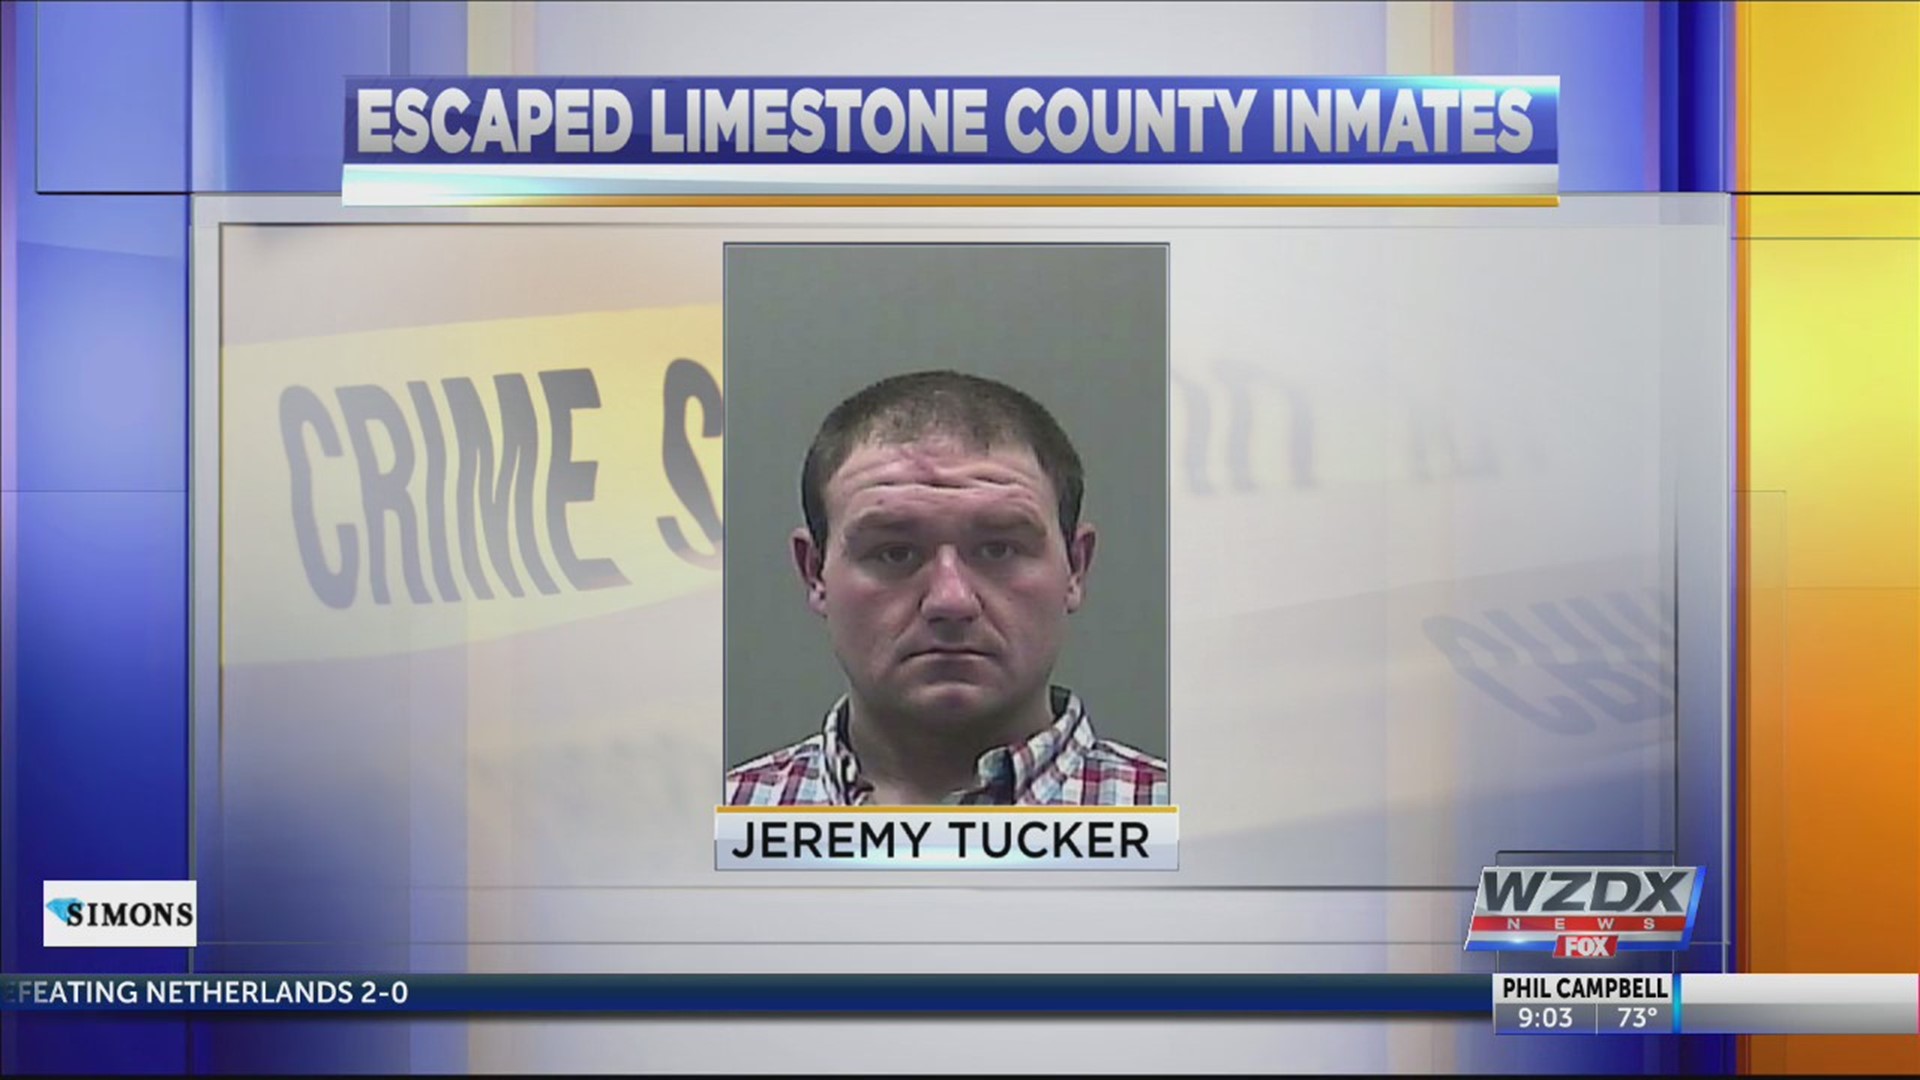 Police are searching for an escaped Limestone County inmate.